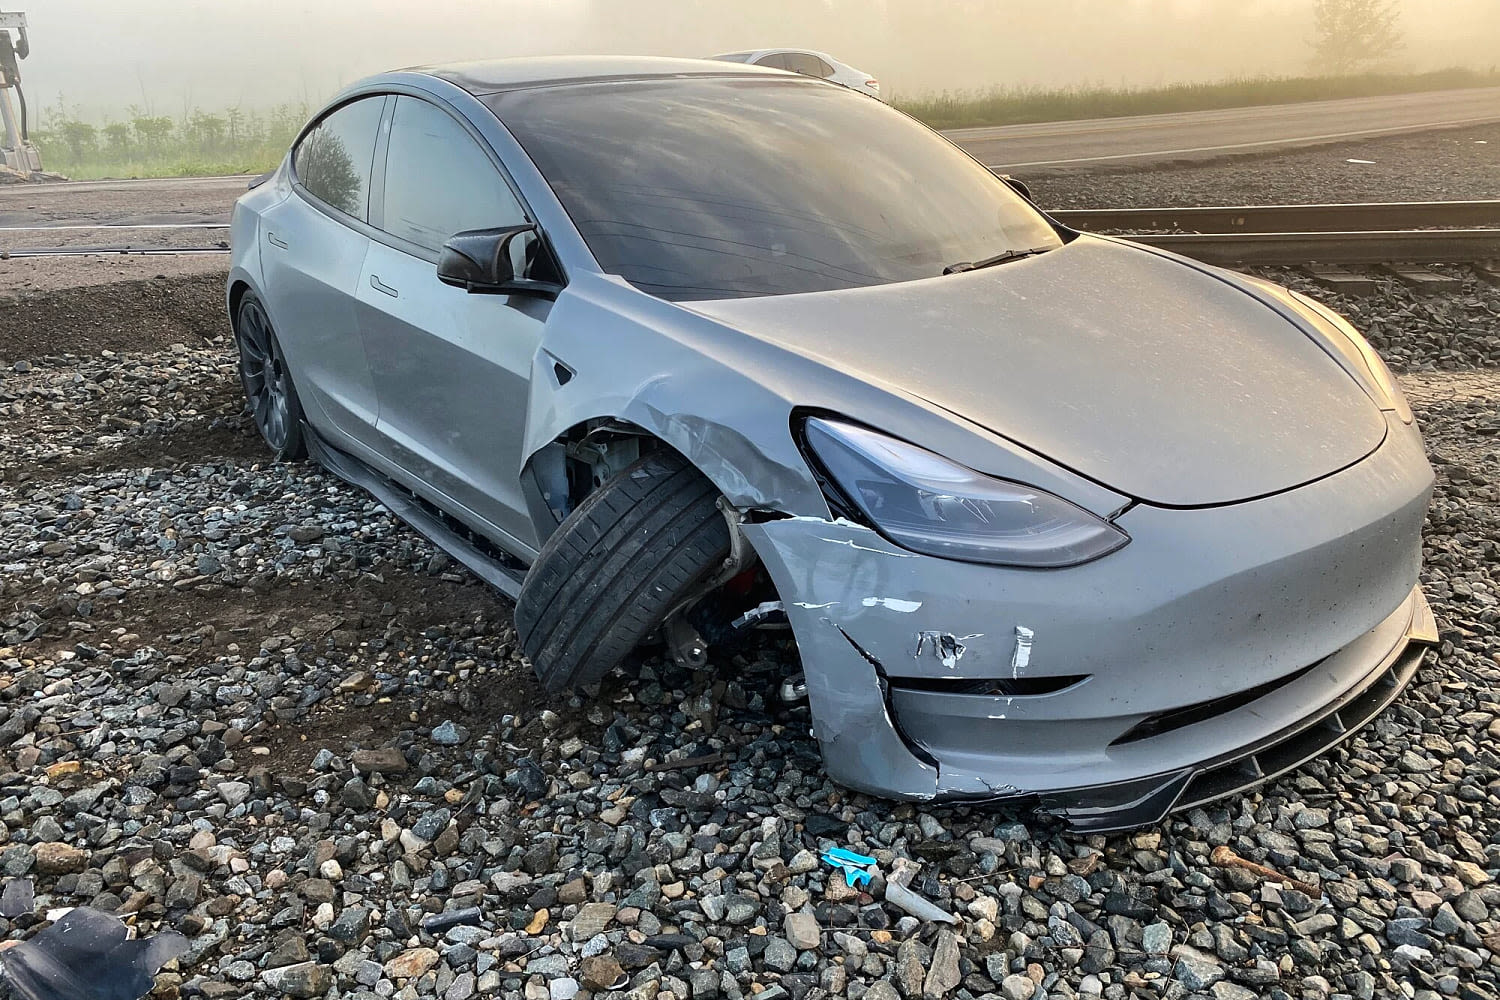 Tesla owner says car's 'self-driving' tech failed to detect train before crash caught on camera